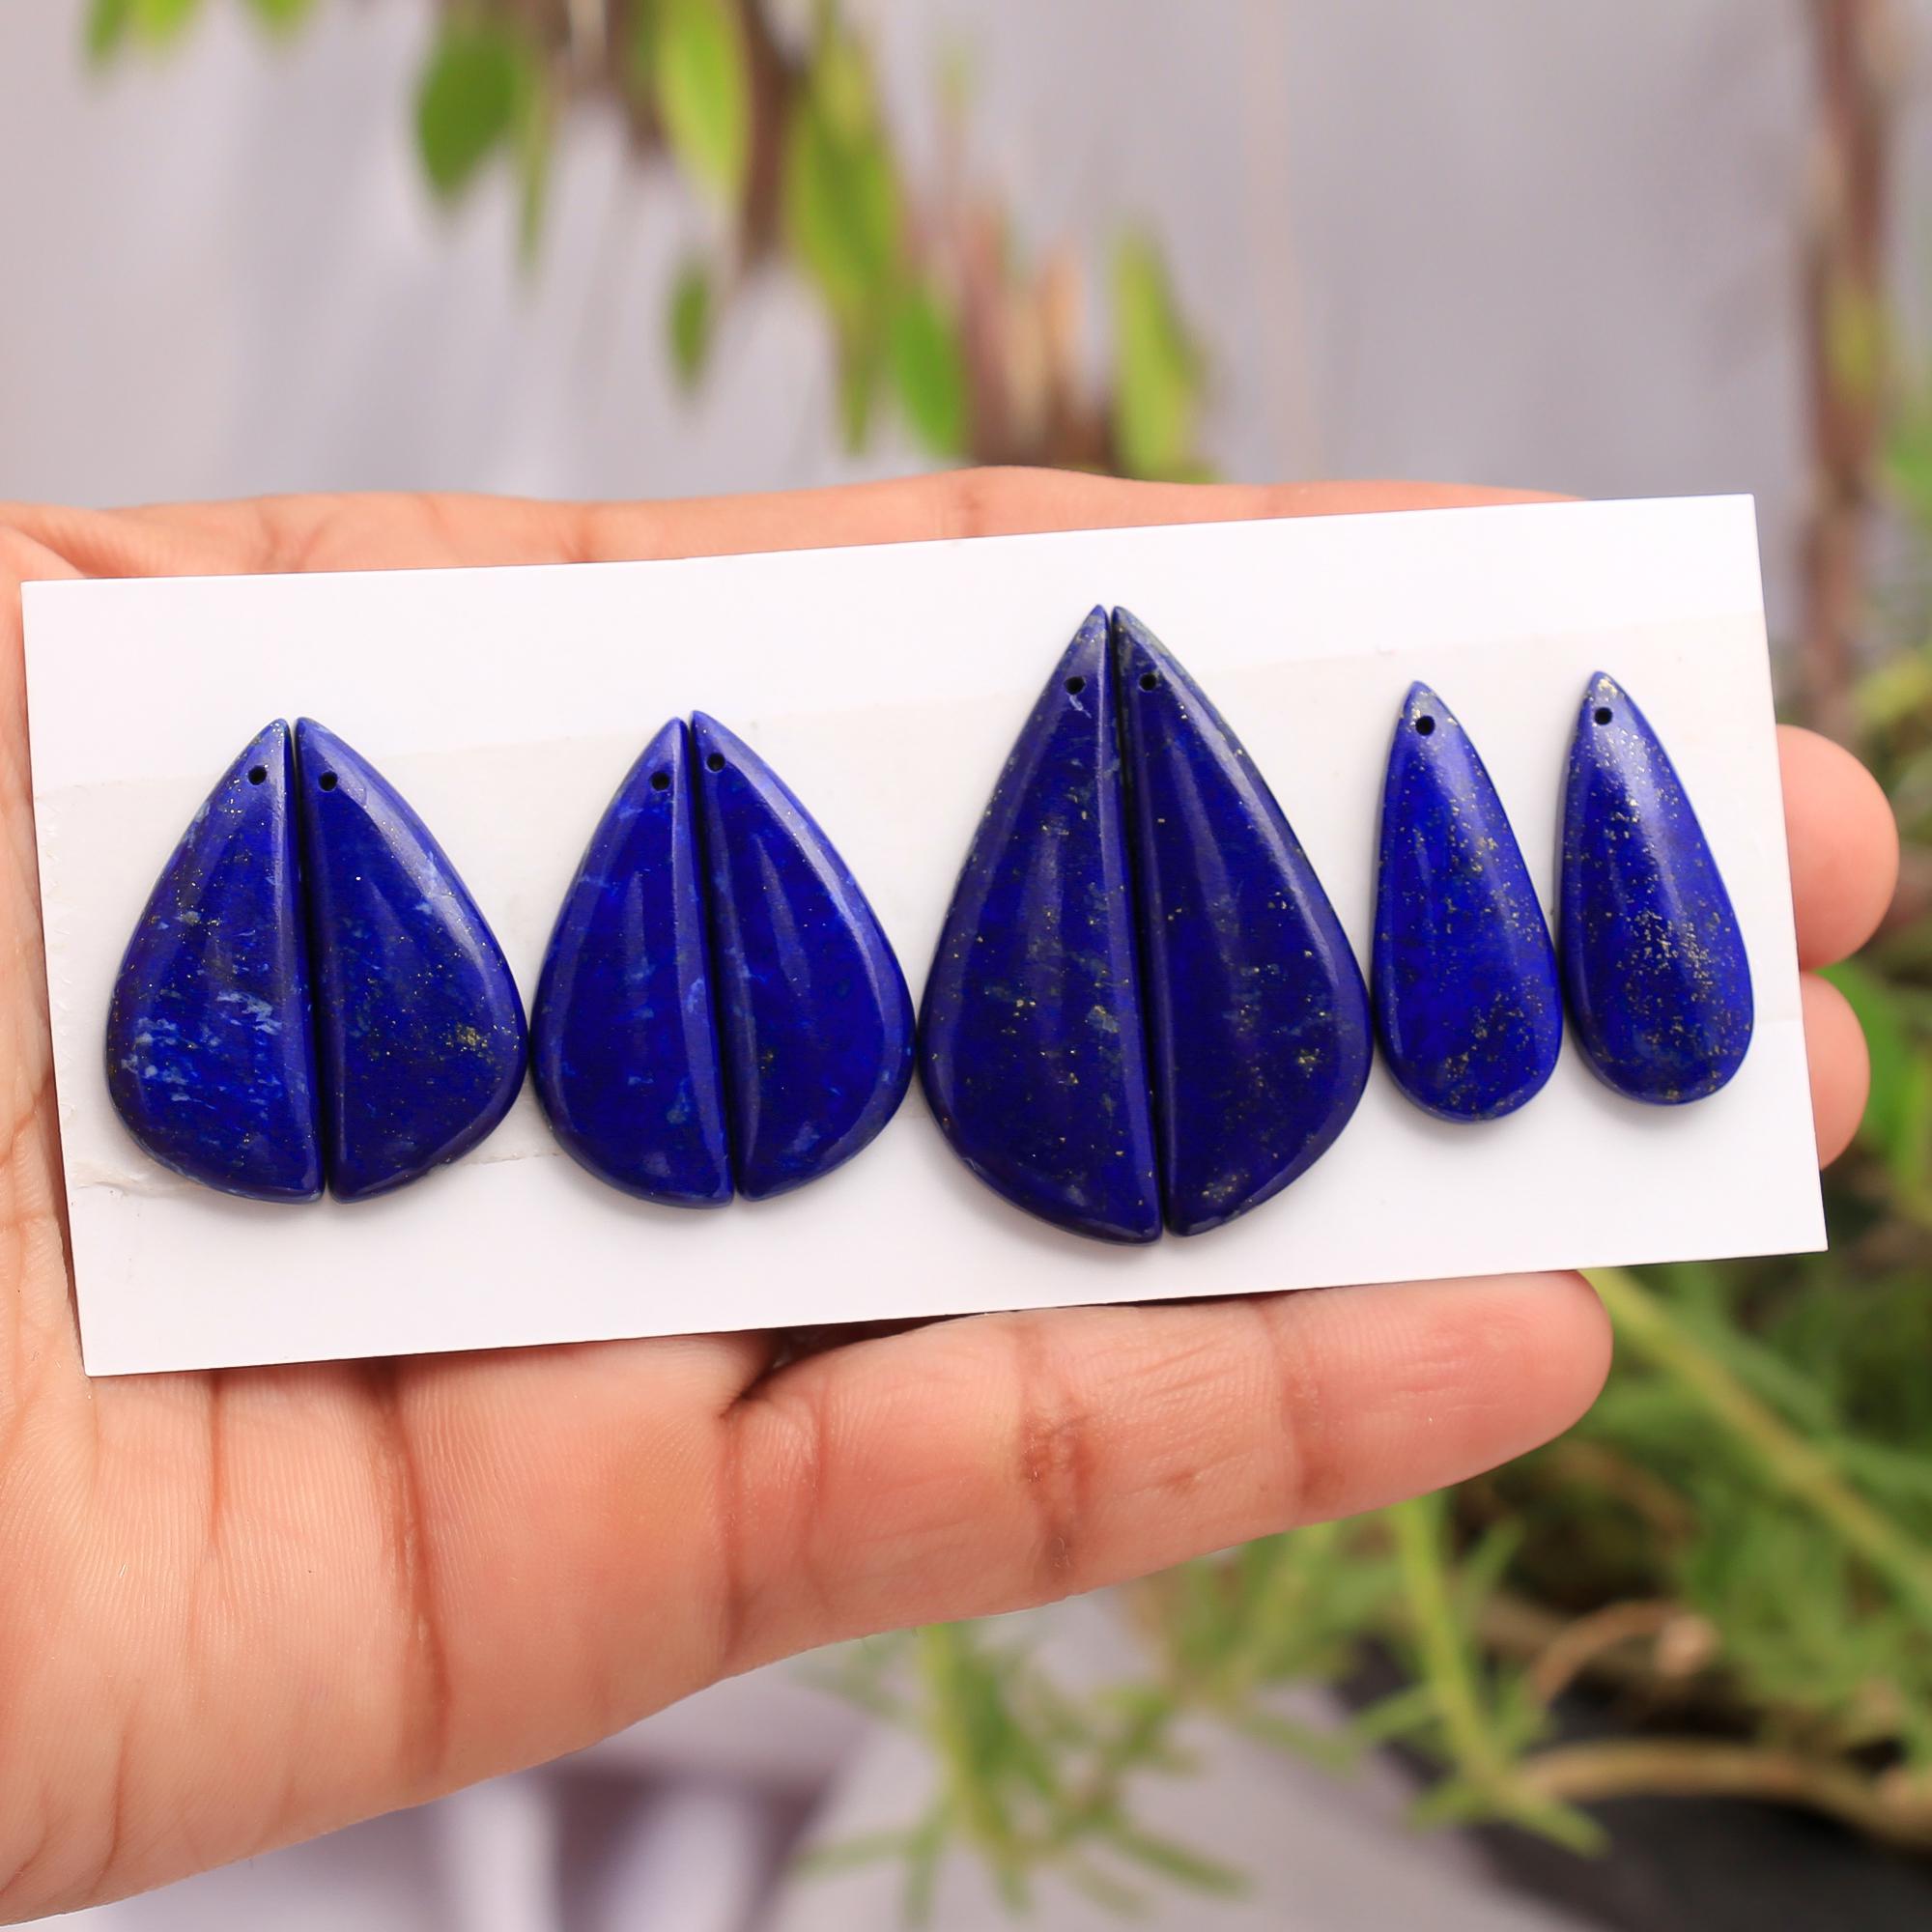 4 Pair 94Cts Natural Lapis Lazuli Front To Back Drilled Earring Mix Pairs Cabochon Loose Gemstone Lot Size 36x12 25x11 mm